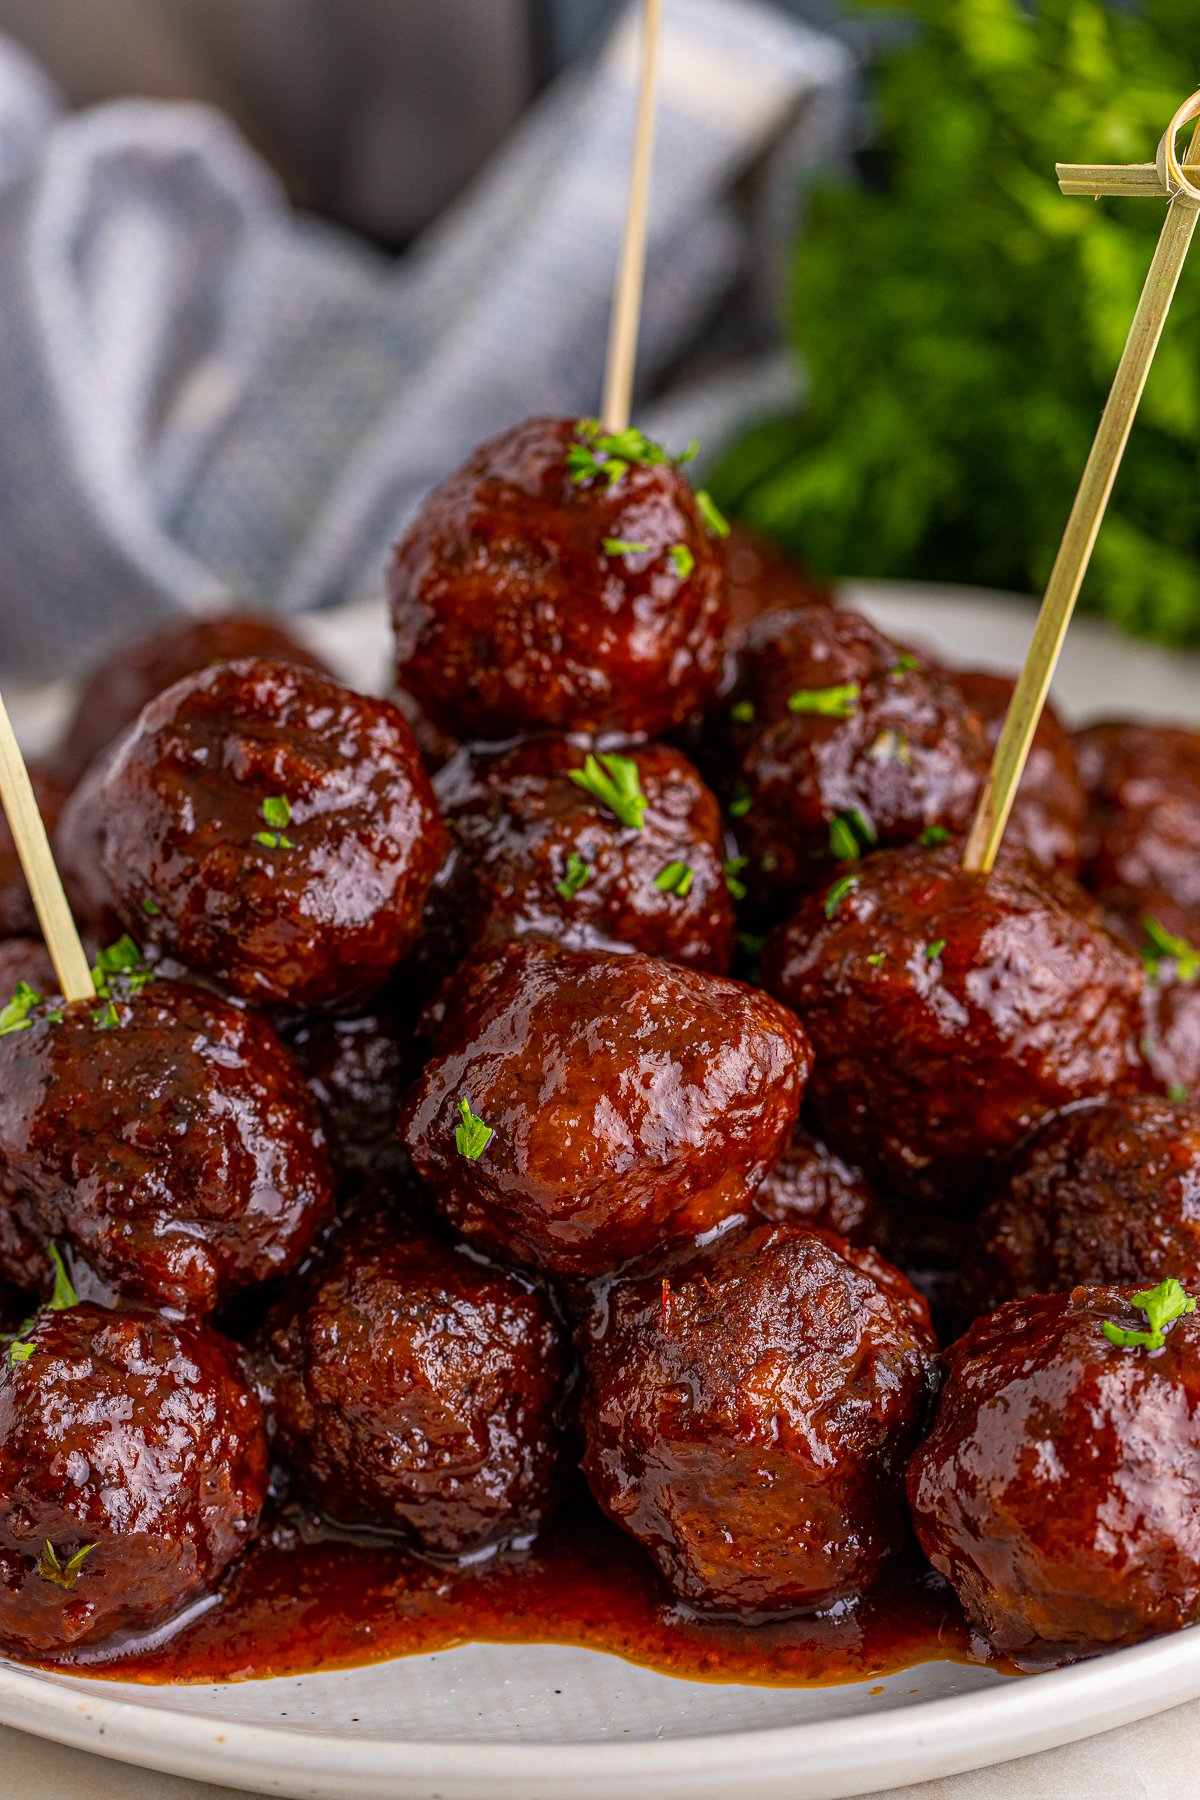 Stacked Crock Pot Grape Jelly Meatballs on plate with toothpicks.